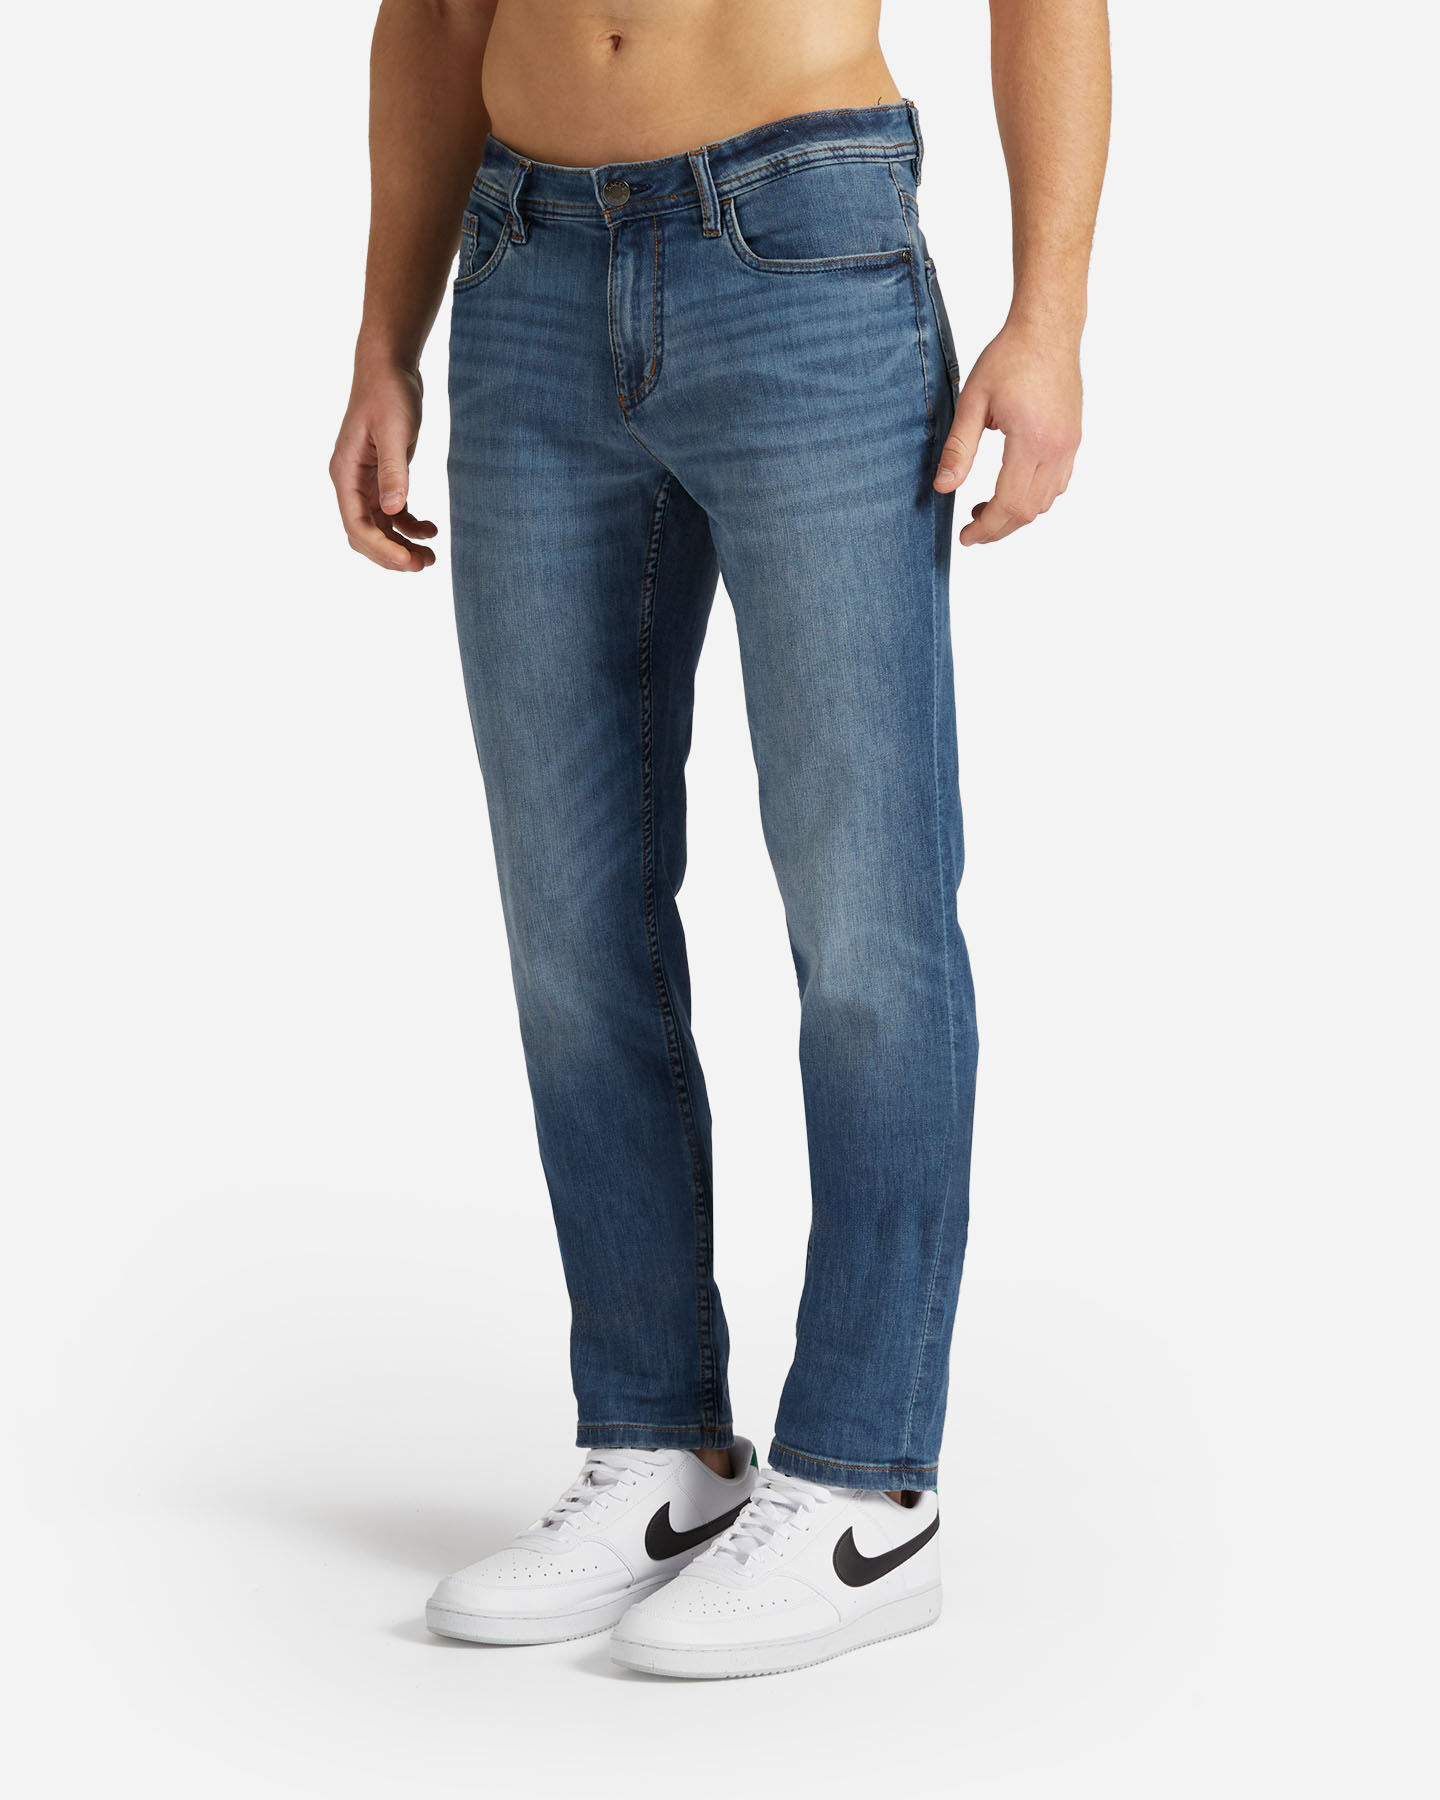  Jeans DACK'S ESSENTIAL M S4129651|MD|44 scatto 2